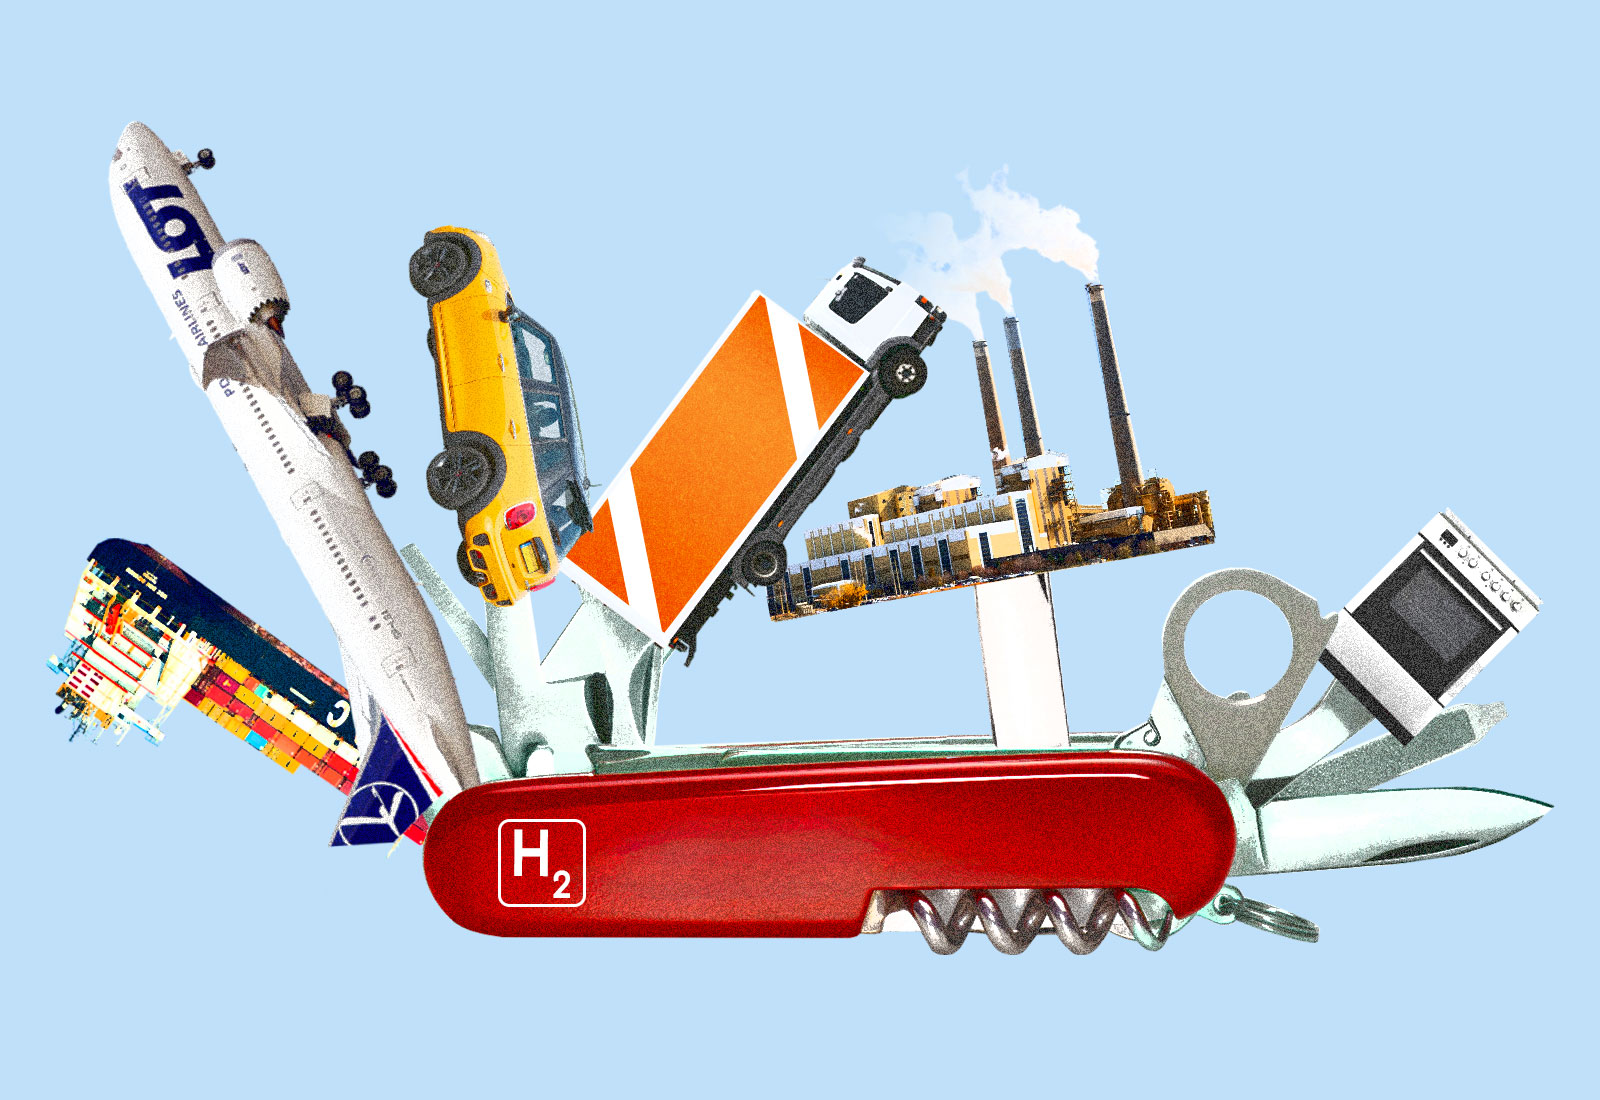 Collage: Swiss Army knife with a cargo ship, airplane, car, truck, factory, and stove as tools